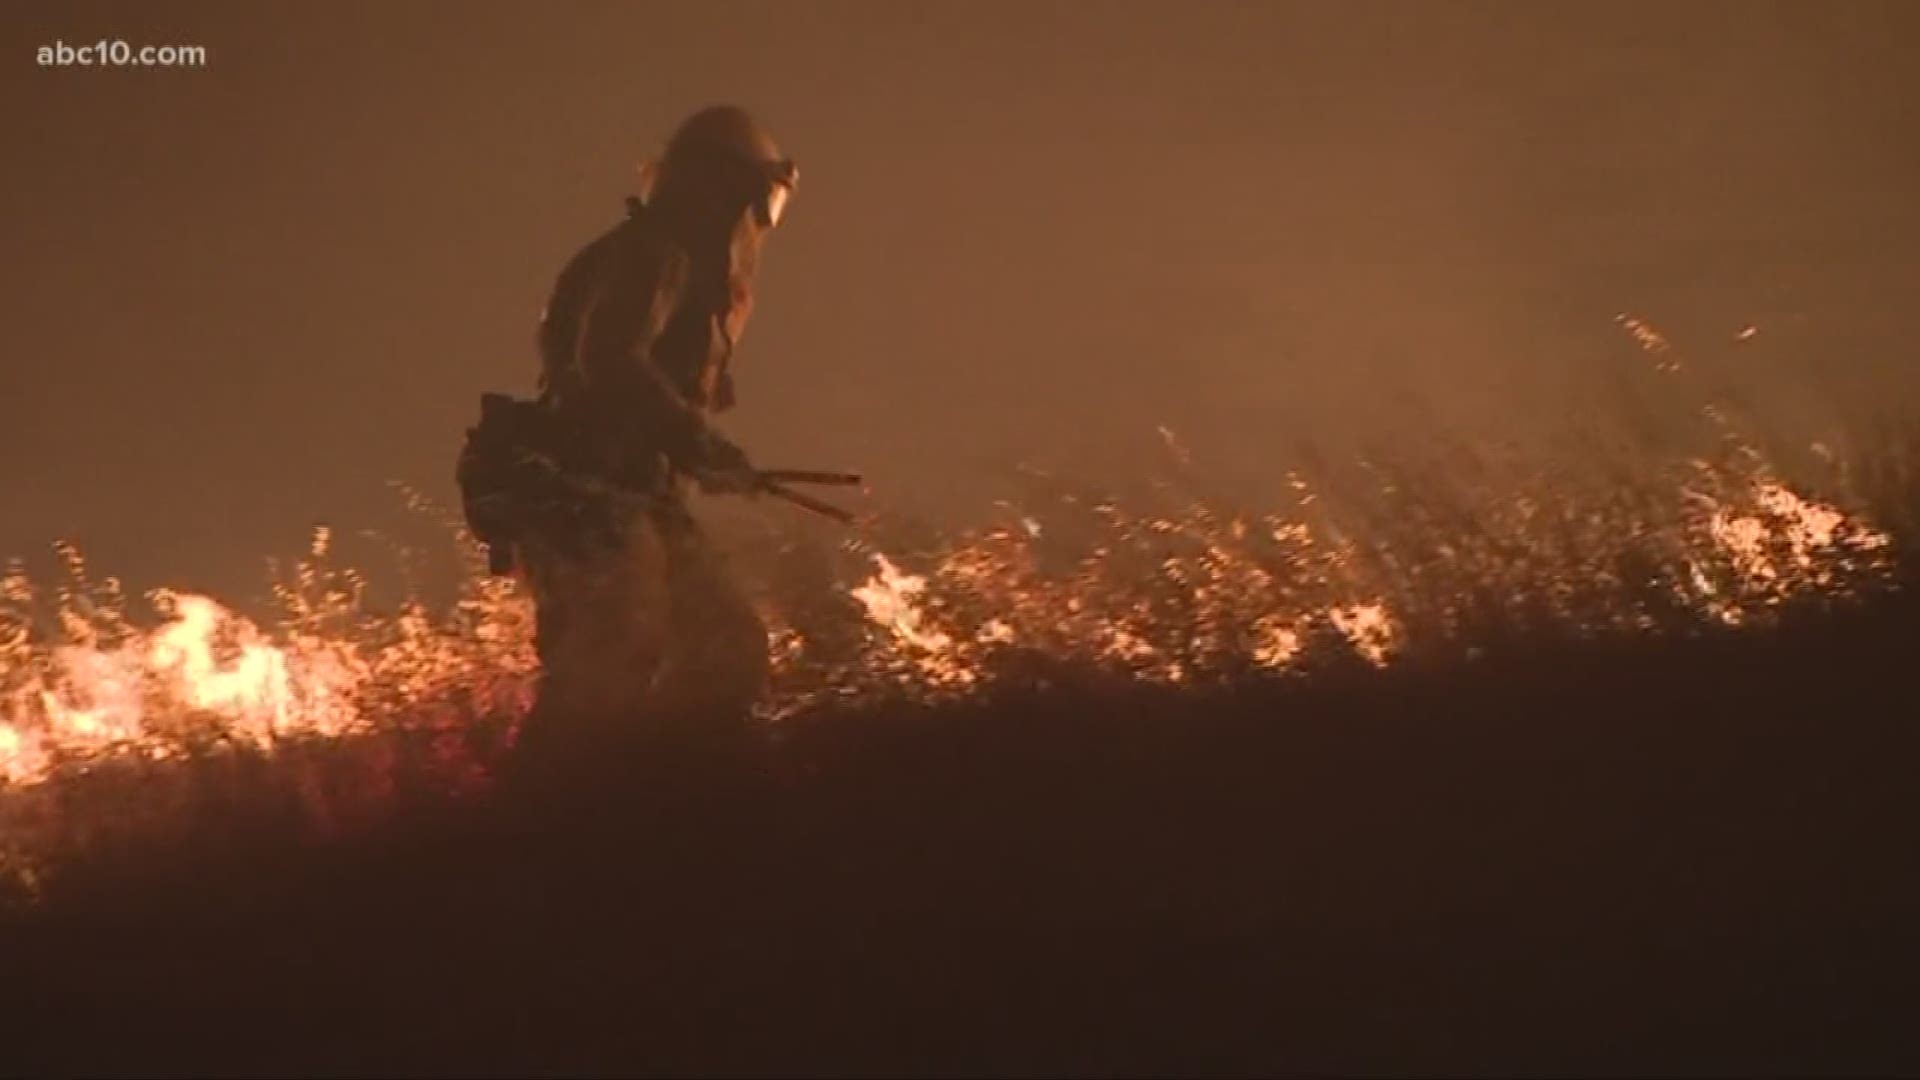 The Santa Clara County Fire Department says in a lawsuit that Verizon slowed its internet communications at a Northern California wildfire command center three weeks ago. Now lawmakers are trying to figure out what's next.